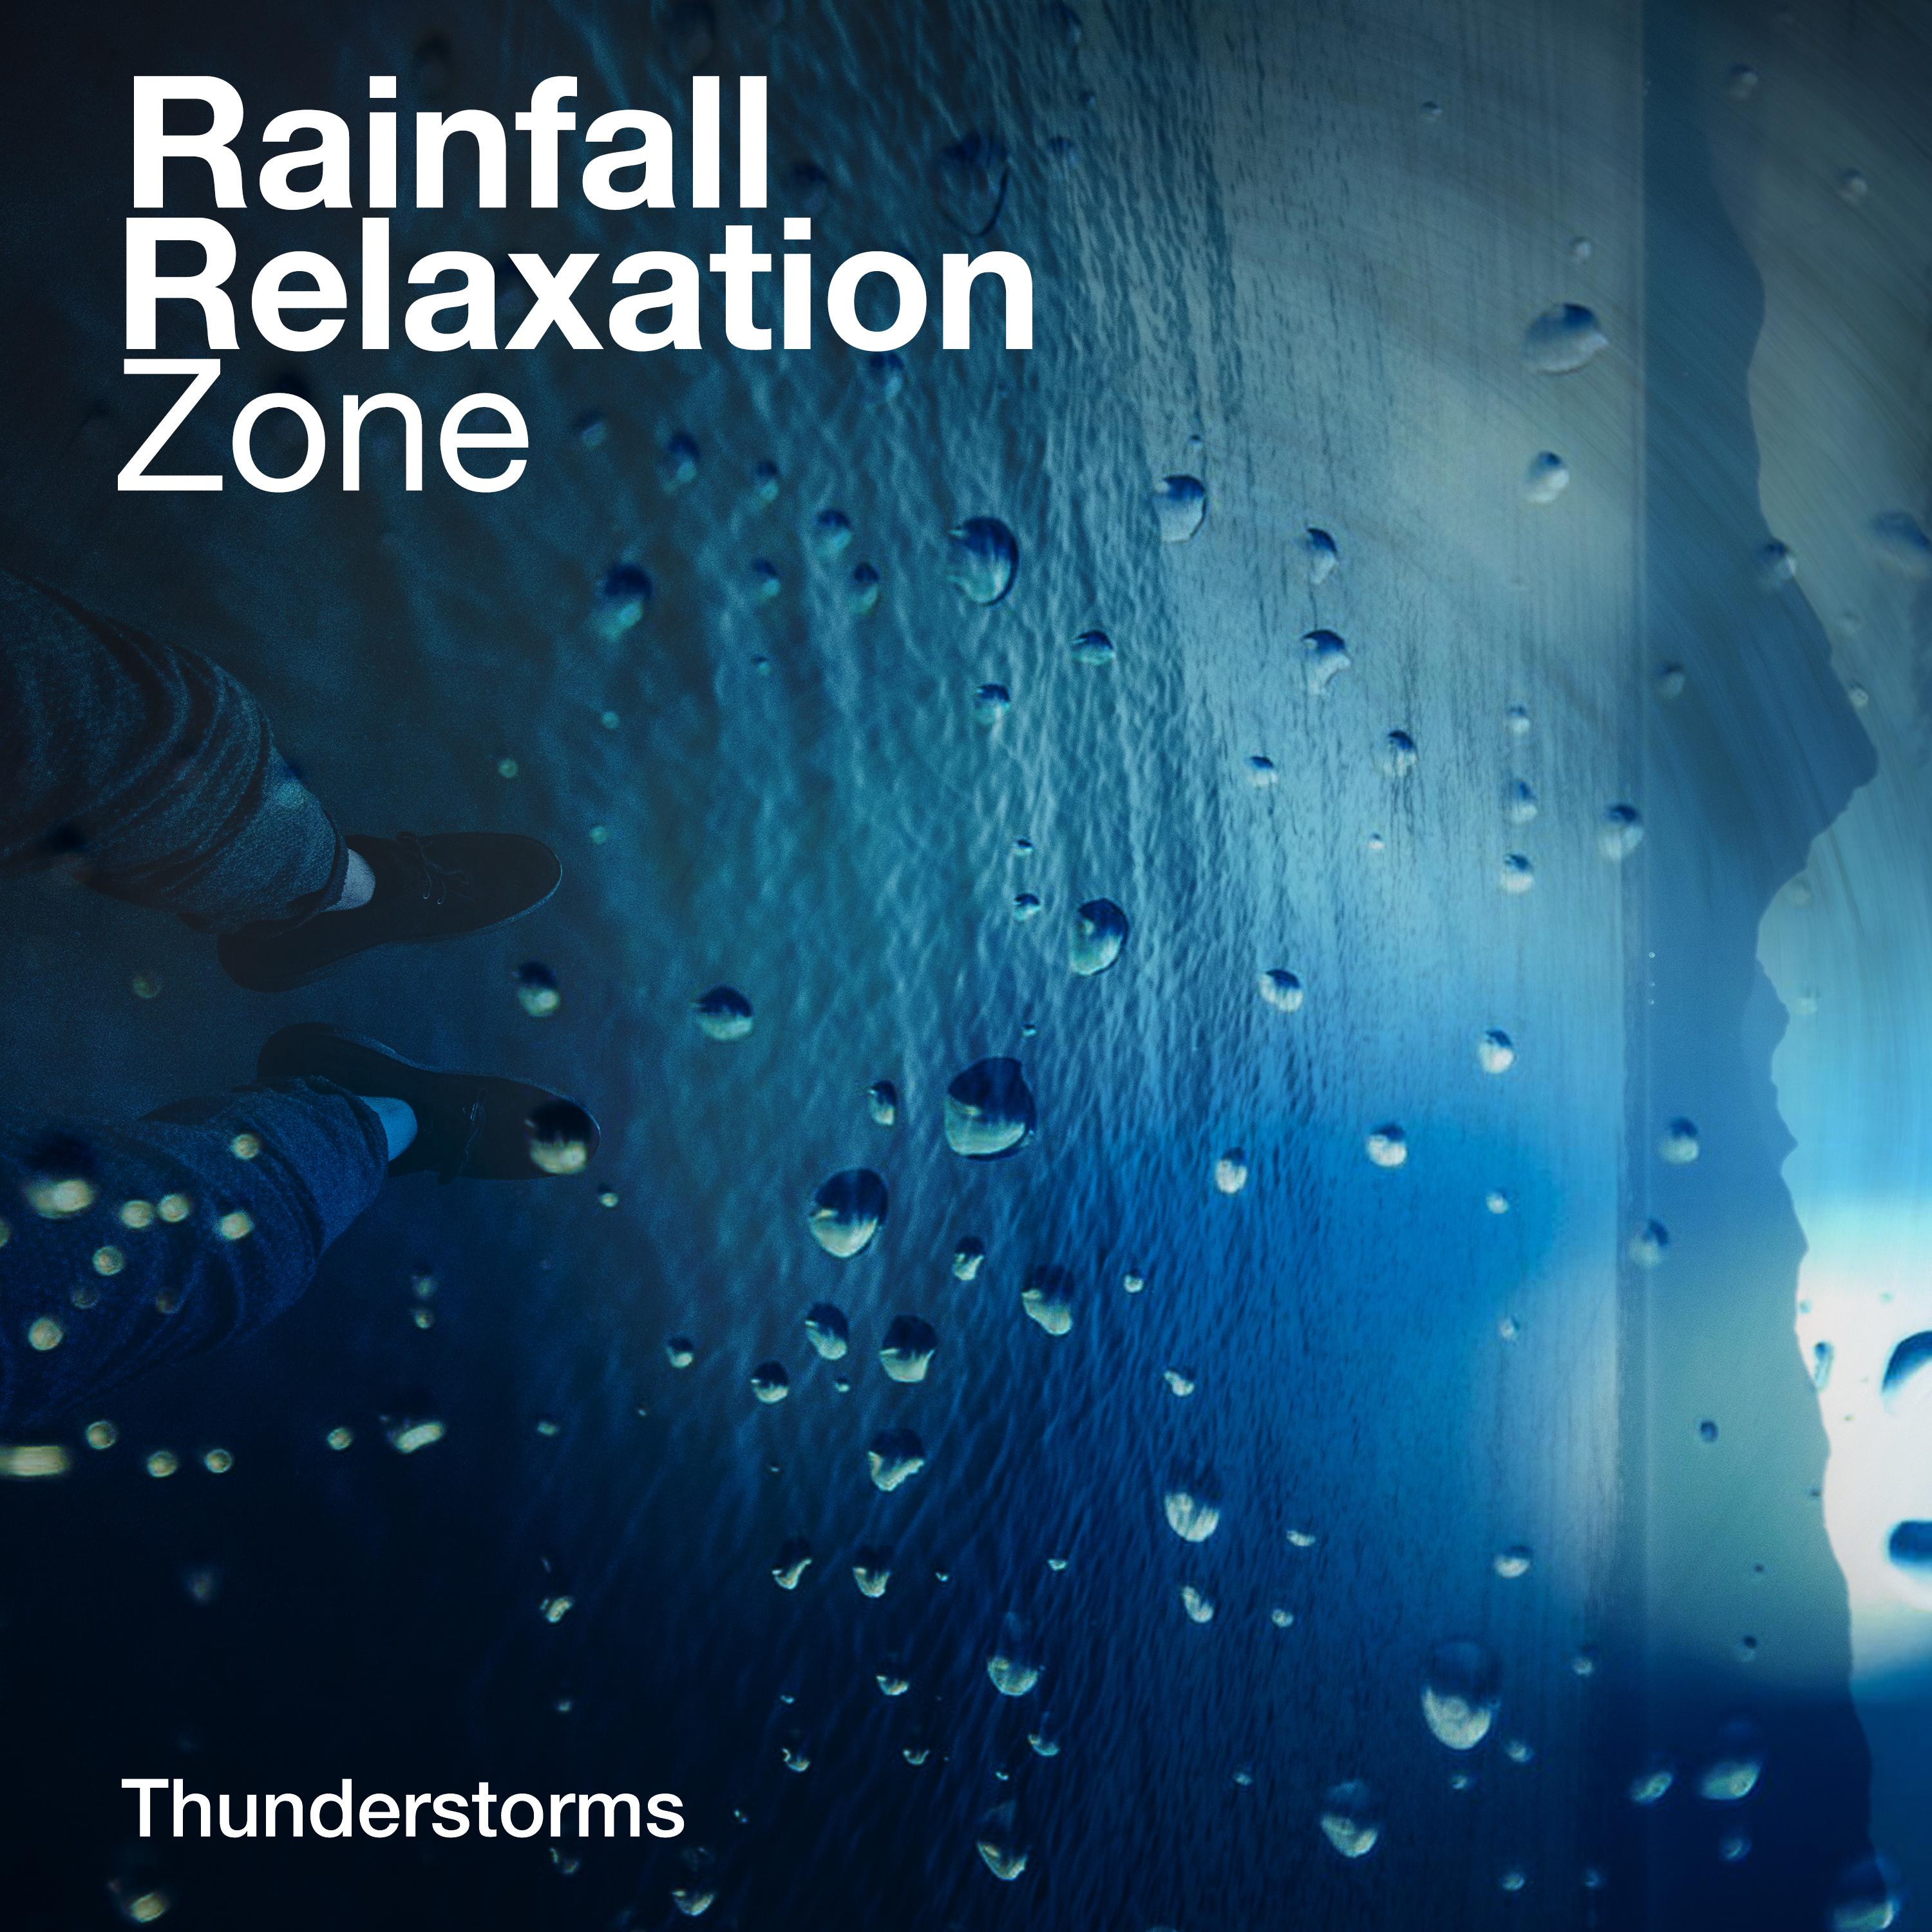 Rainfall Relaxation Zone